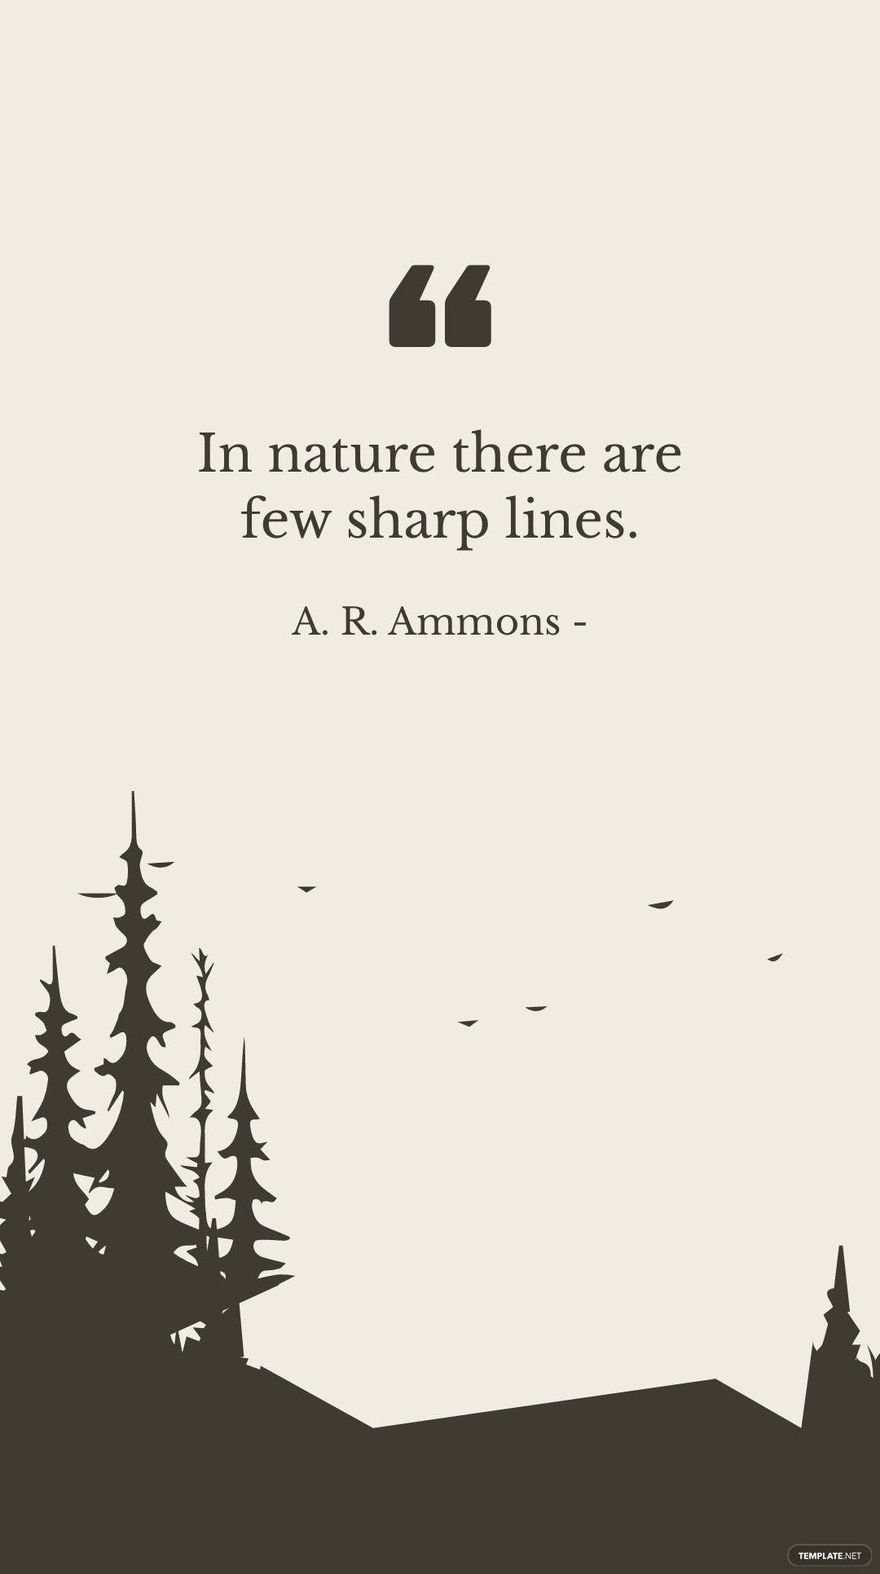 A. R. Ammons - In nature there are few sharp lines.